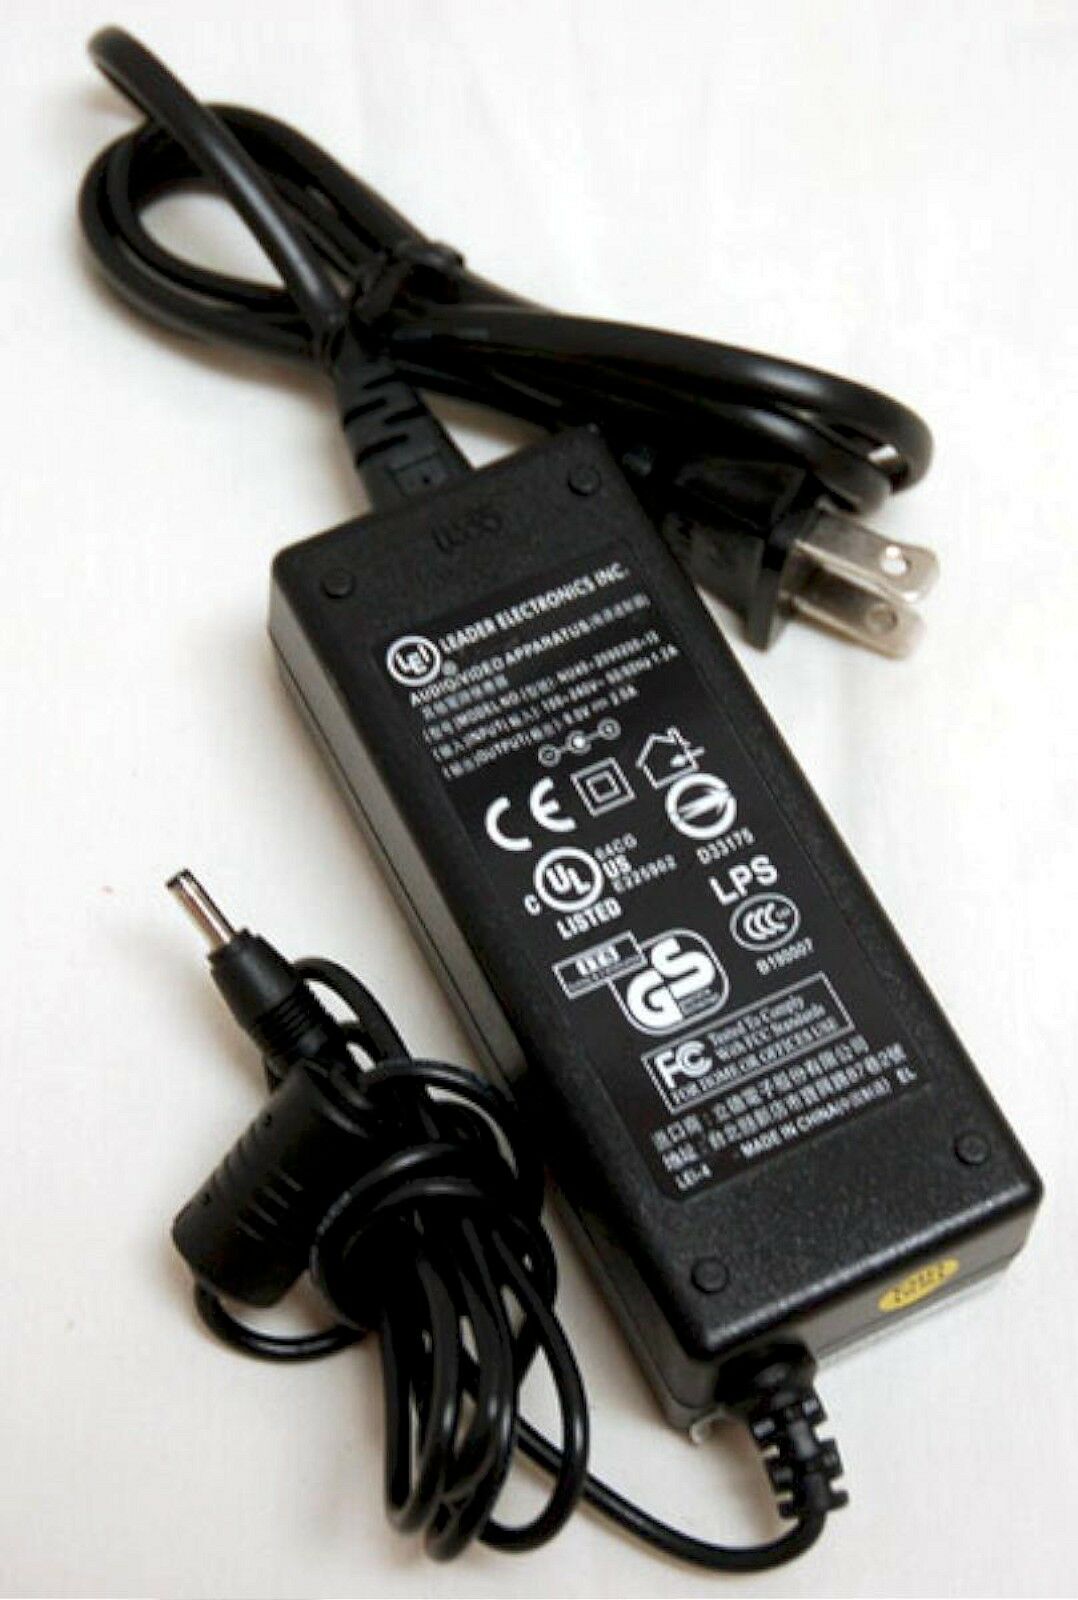 NEW LEI 9.0V 2.0A NU40-2090200-13 AC ADAPTER FOR Audiovox D1700 Portable DVD Player AC ADAPTER AMW M - Click Image to Close